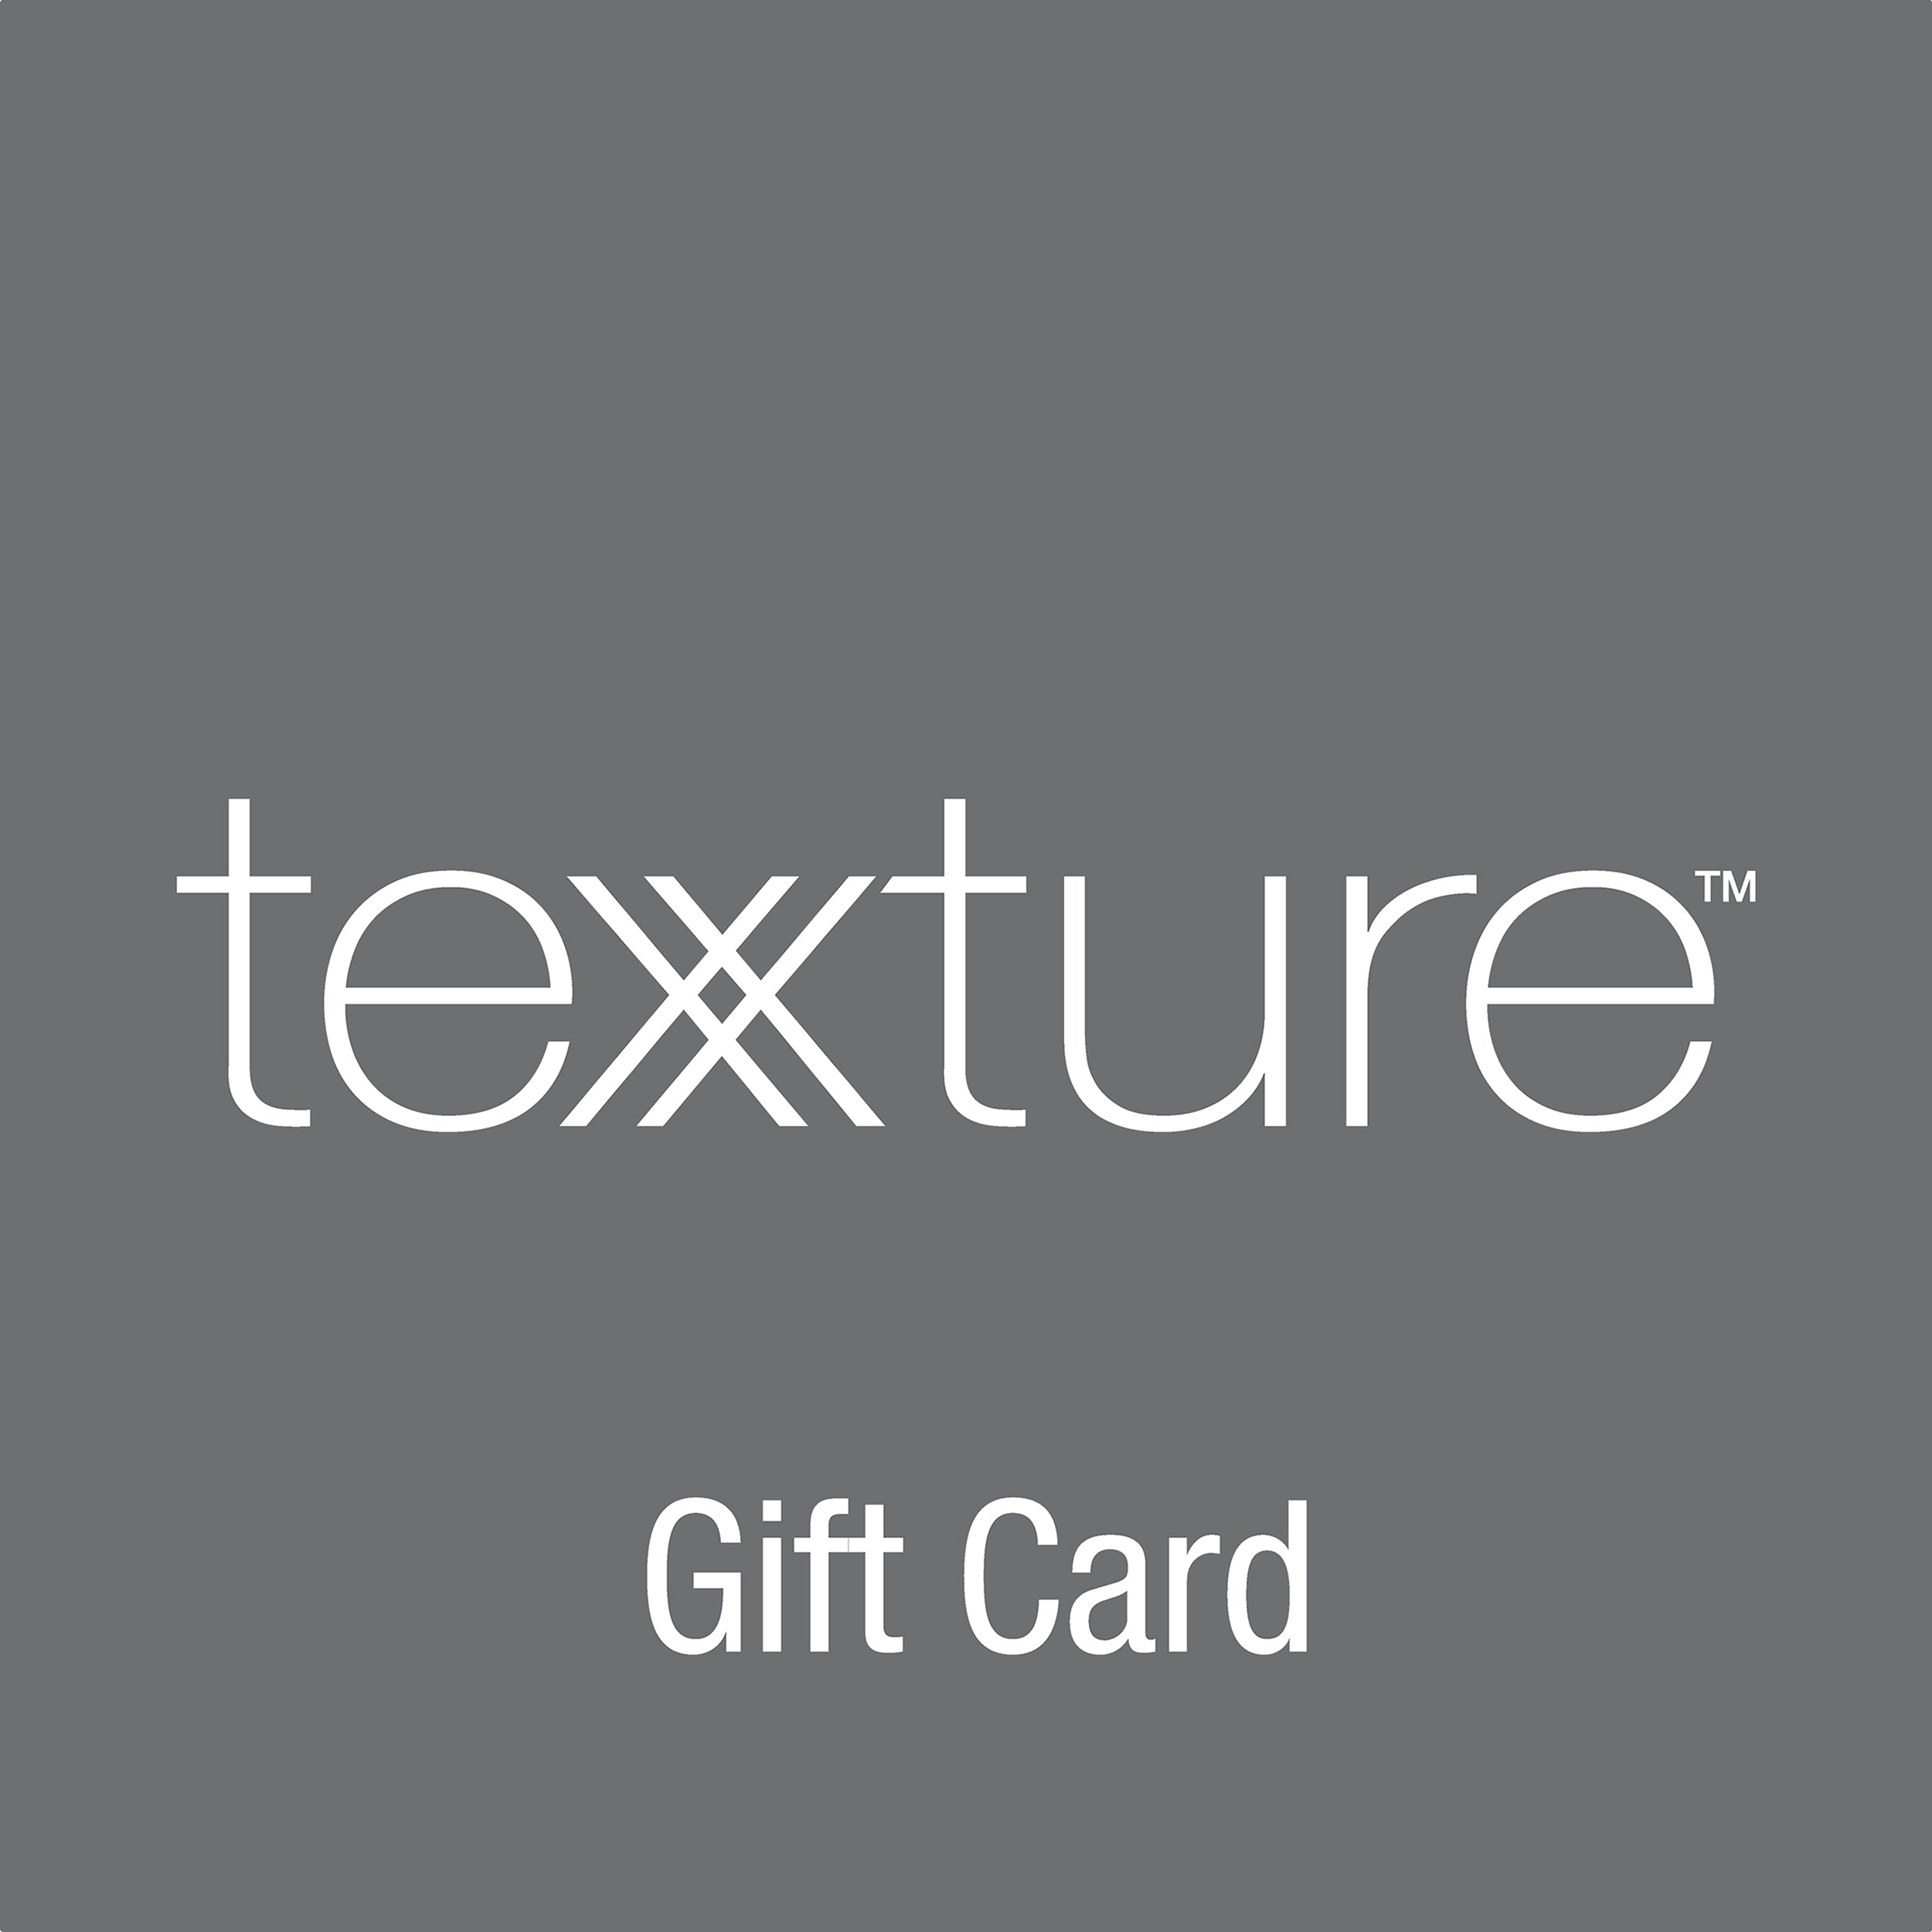 texxture Gift Card